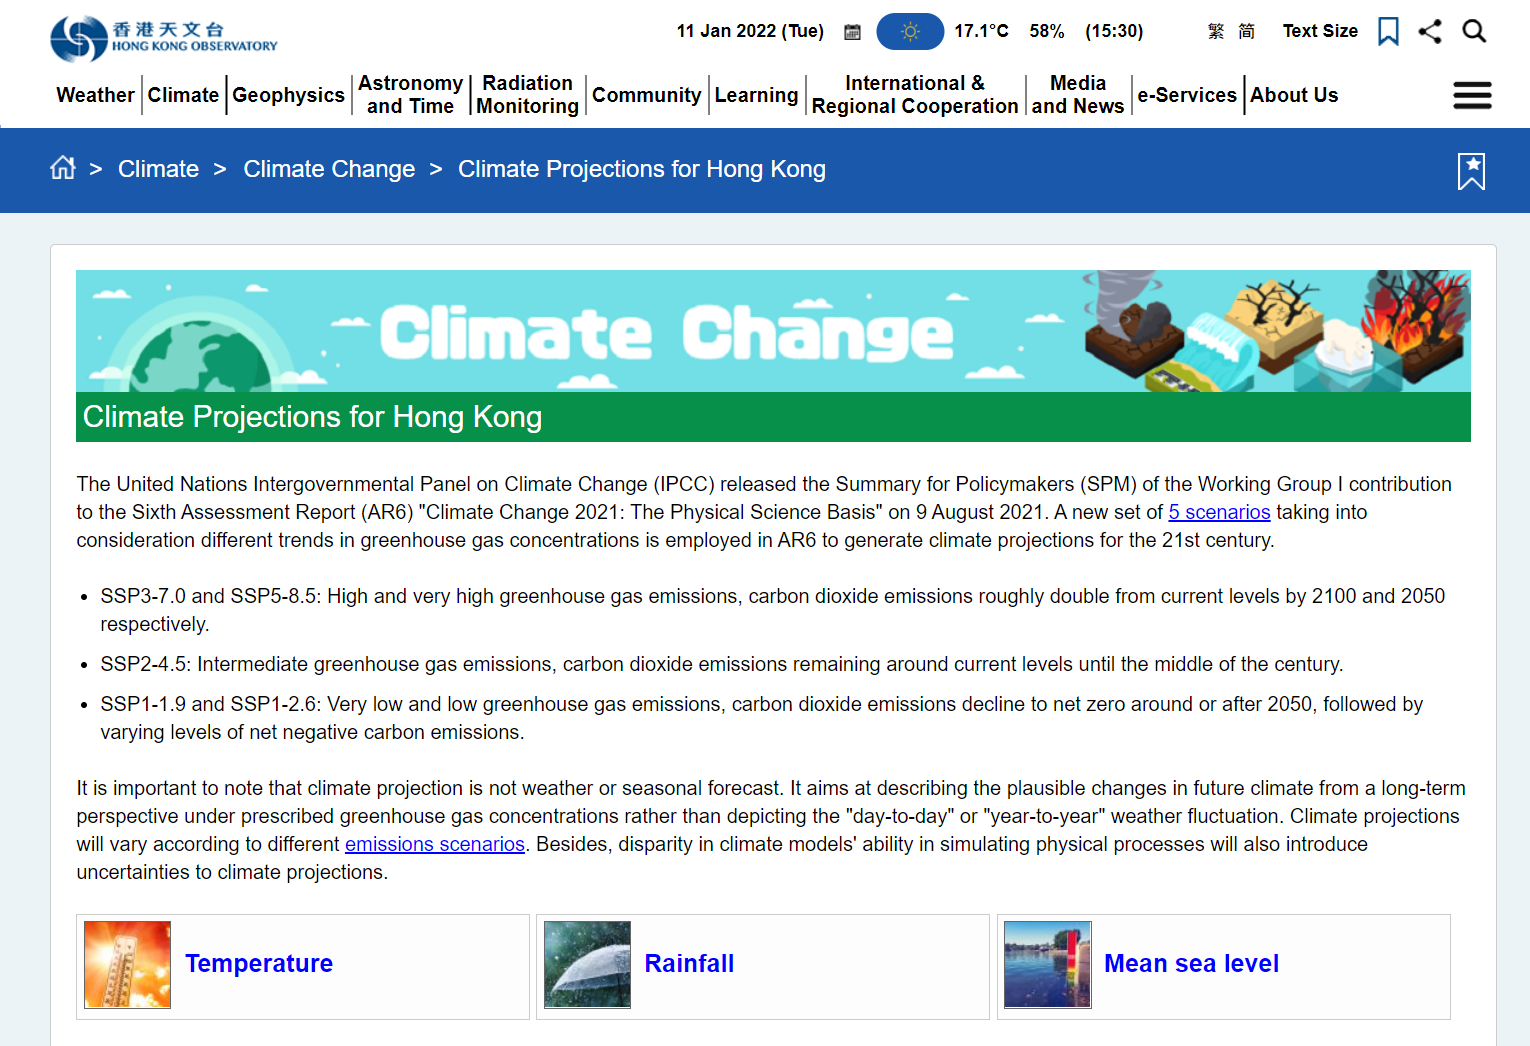 Update of Climate Projections for Hong Kong webpages